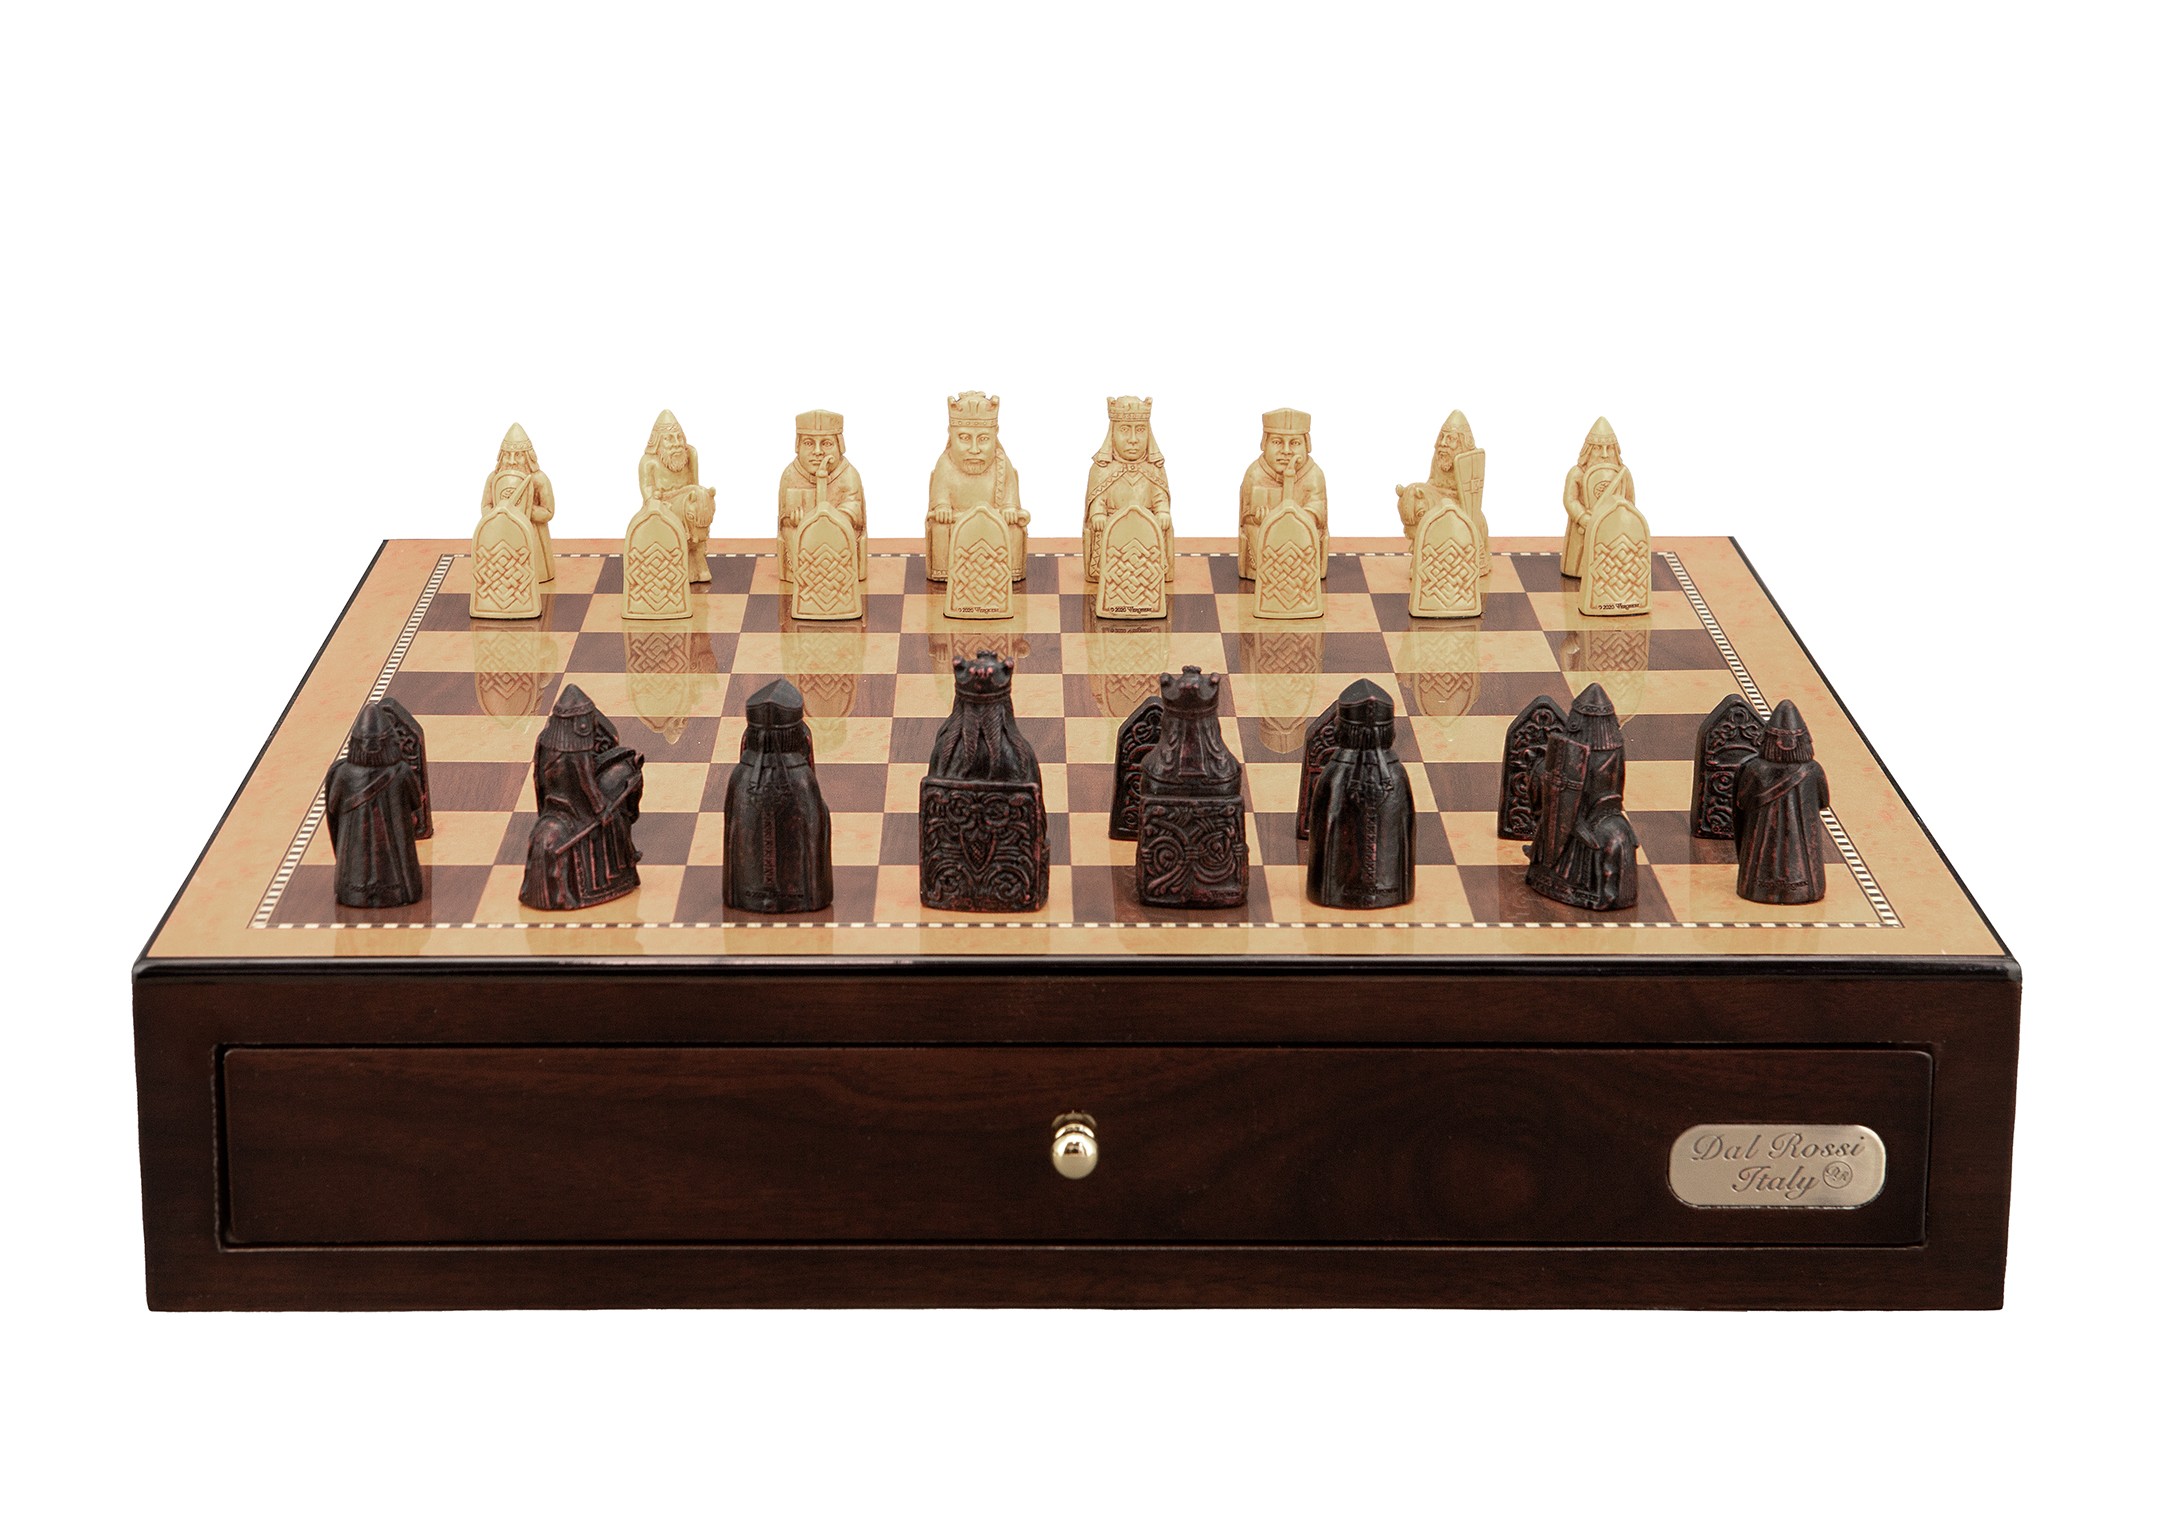 Dal Rossi Italy Isle of Lewis Chess Set on a Shiny Walnut Chess Box with Drawers 18" 